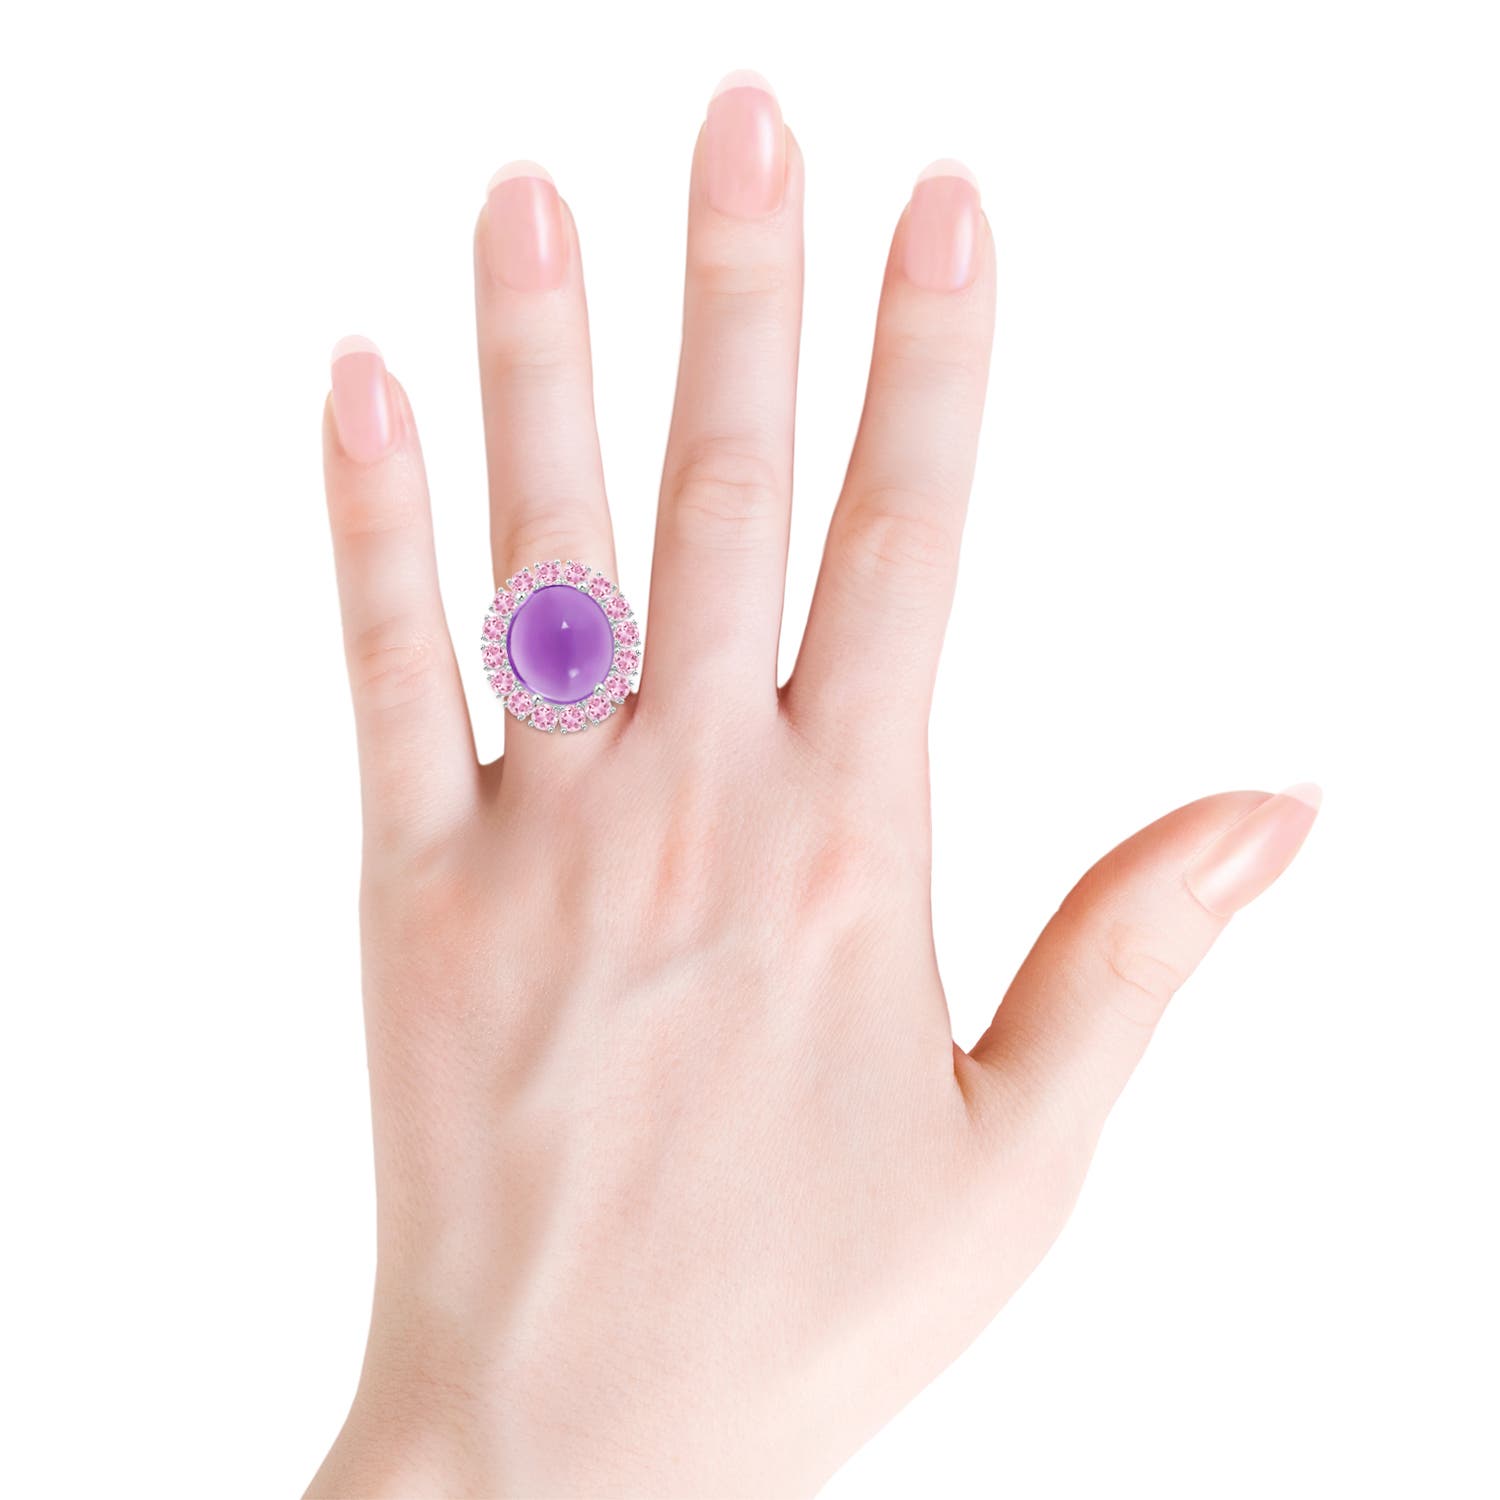 A - Amethyst / 13.56 CT / 14 KT White Gold